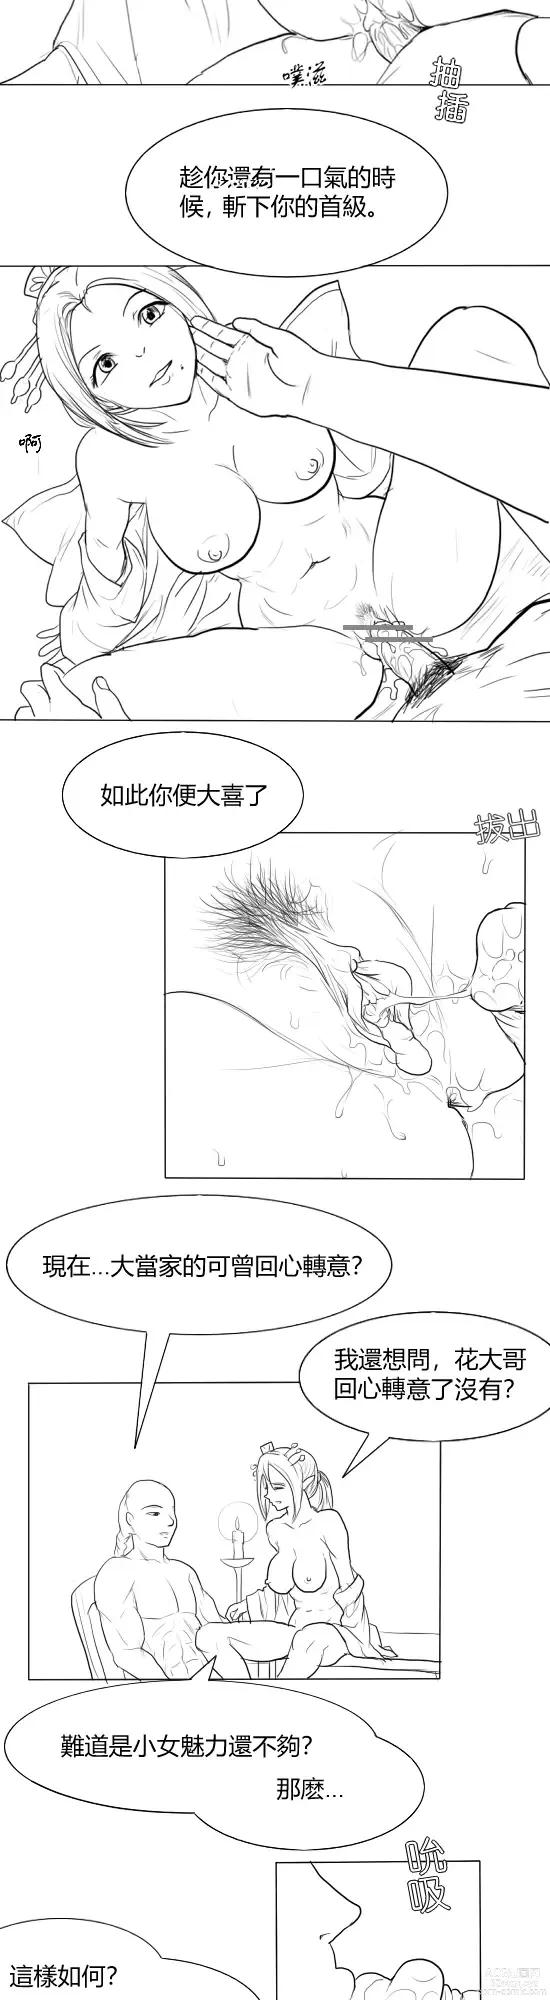 Page 17 of doujinshi 落英  第一话